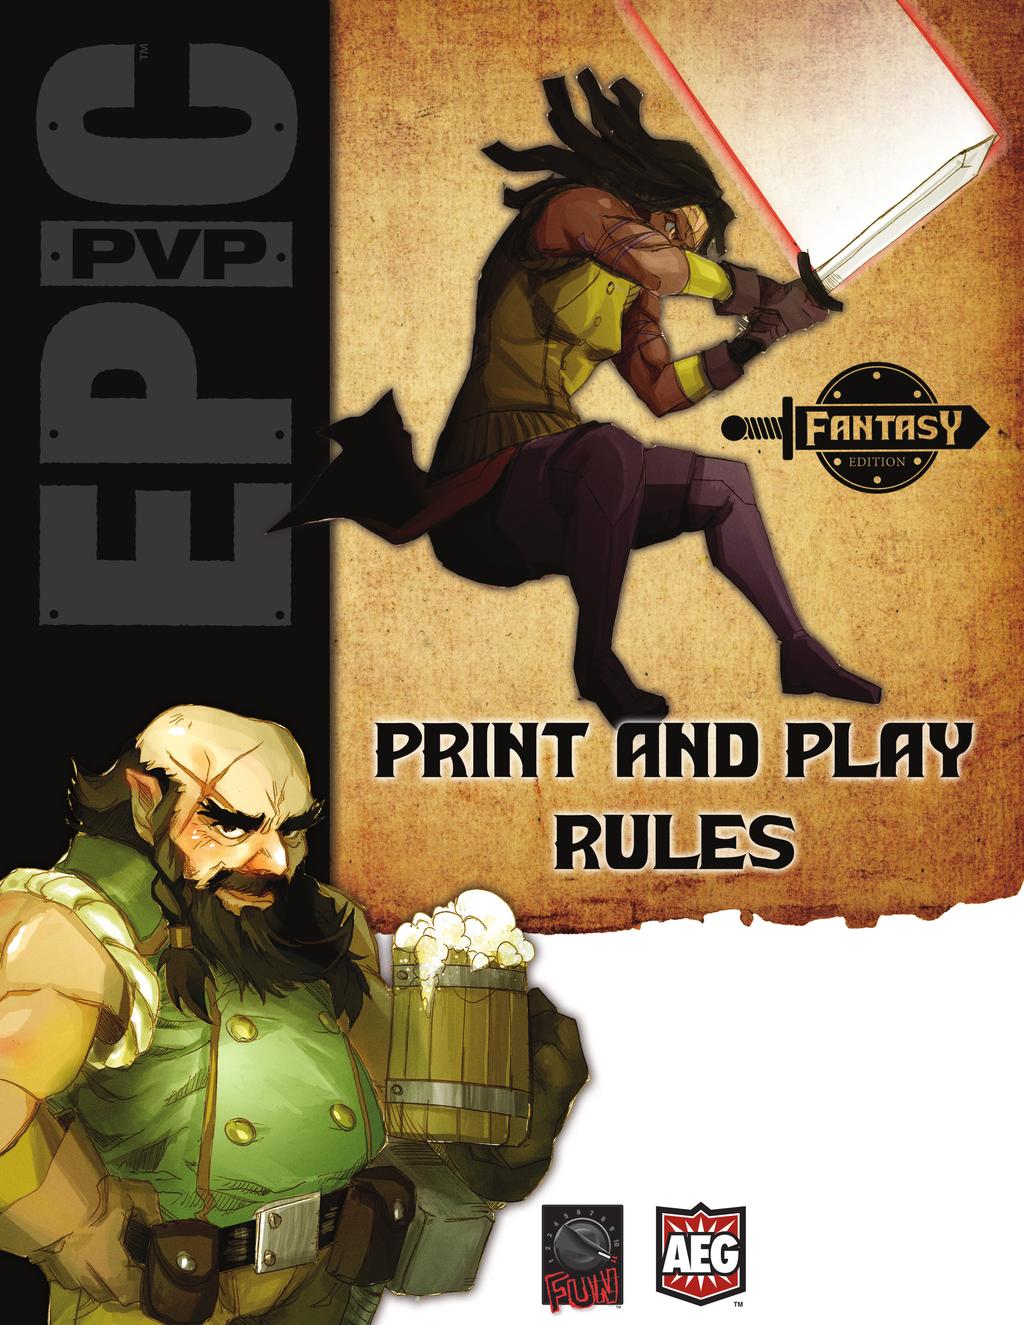 The concept of Epic PvP is simple; build a character by choosing and shuffling two small decks of cards a Race deck and a Class deck into a larger deck. Take this deck and battle with your friends.